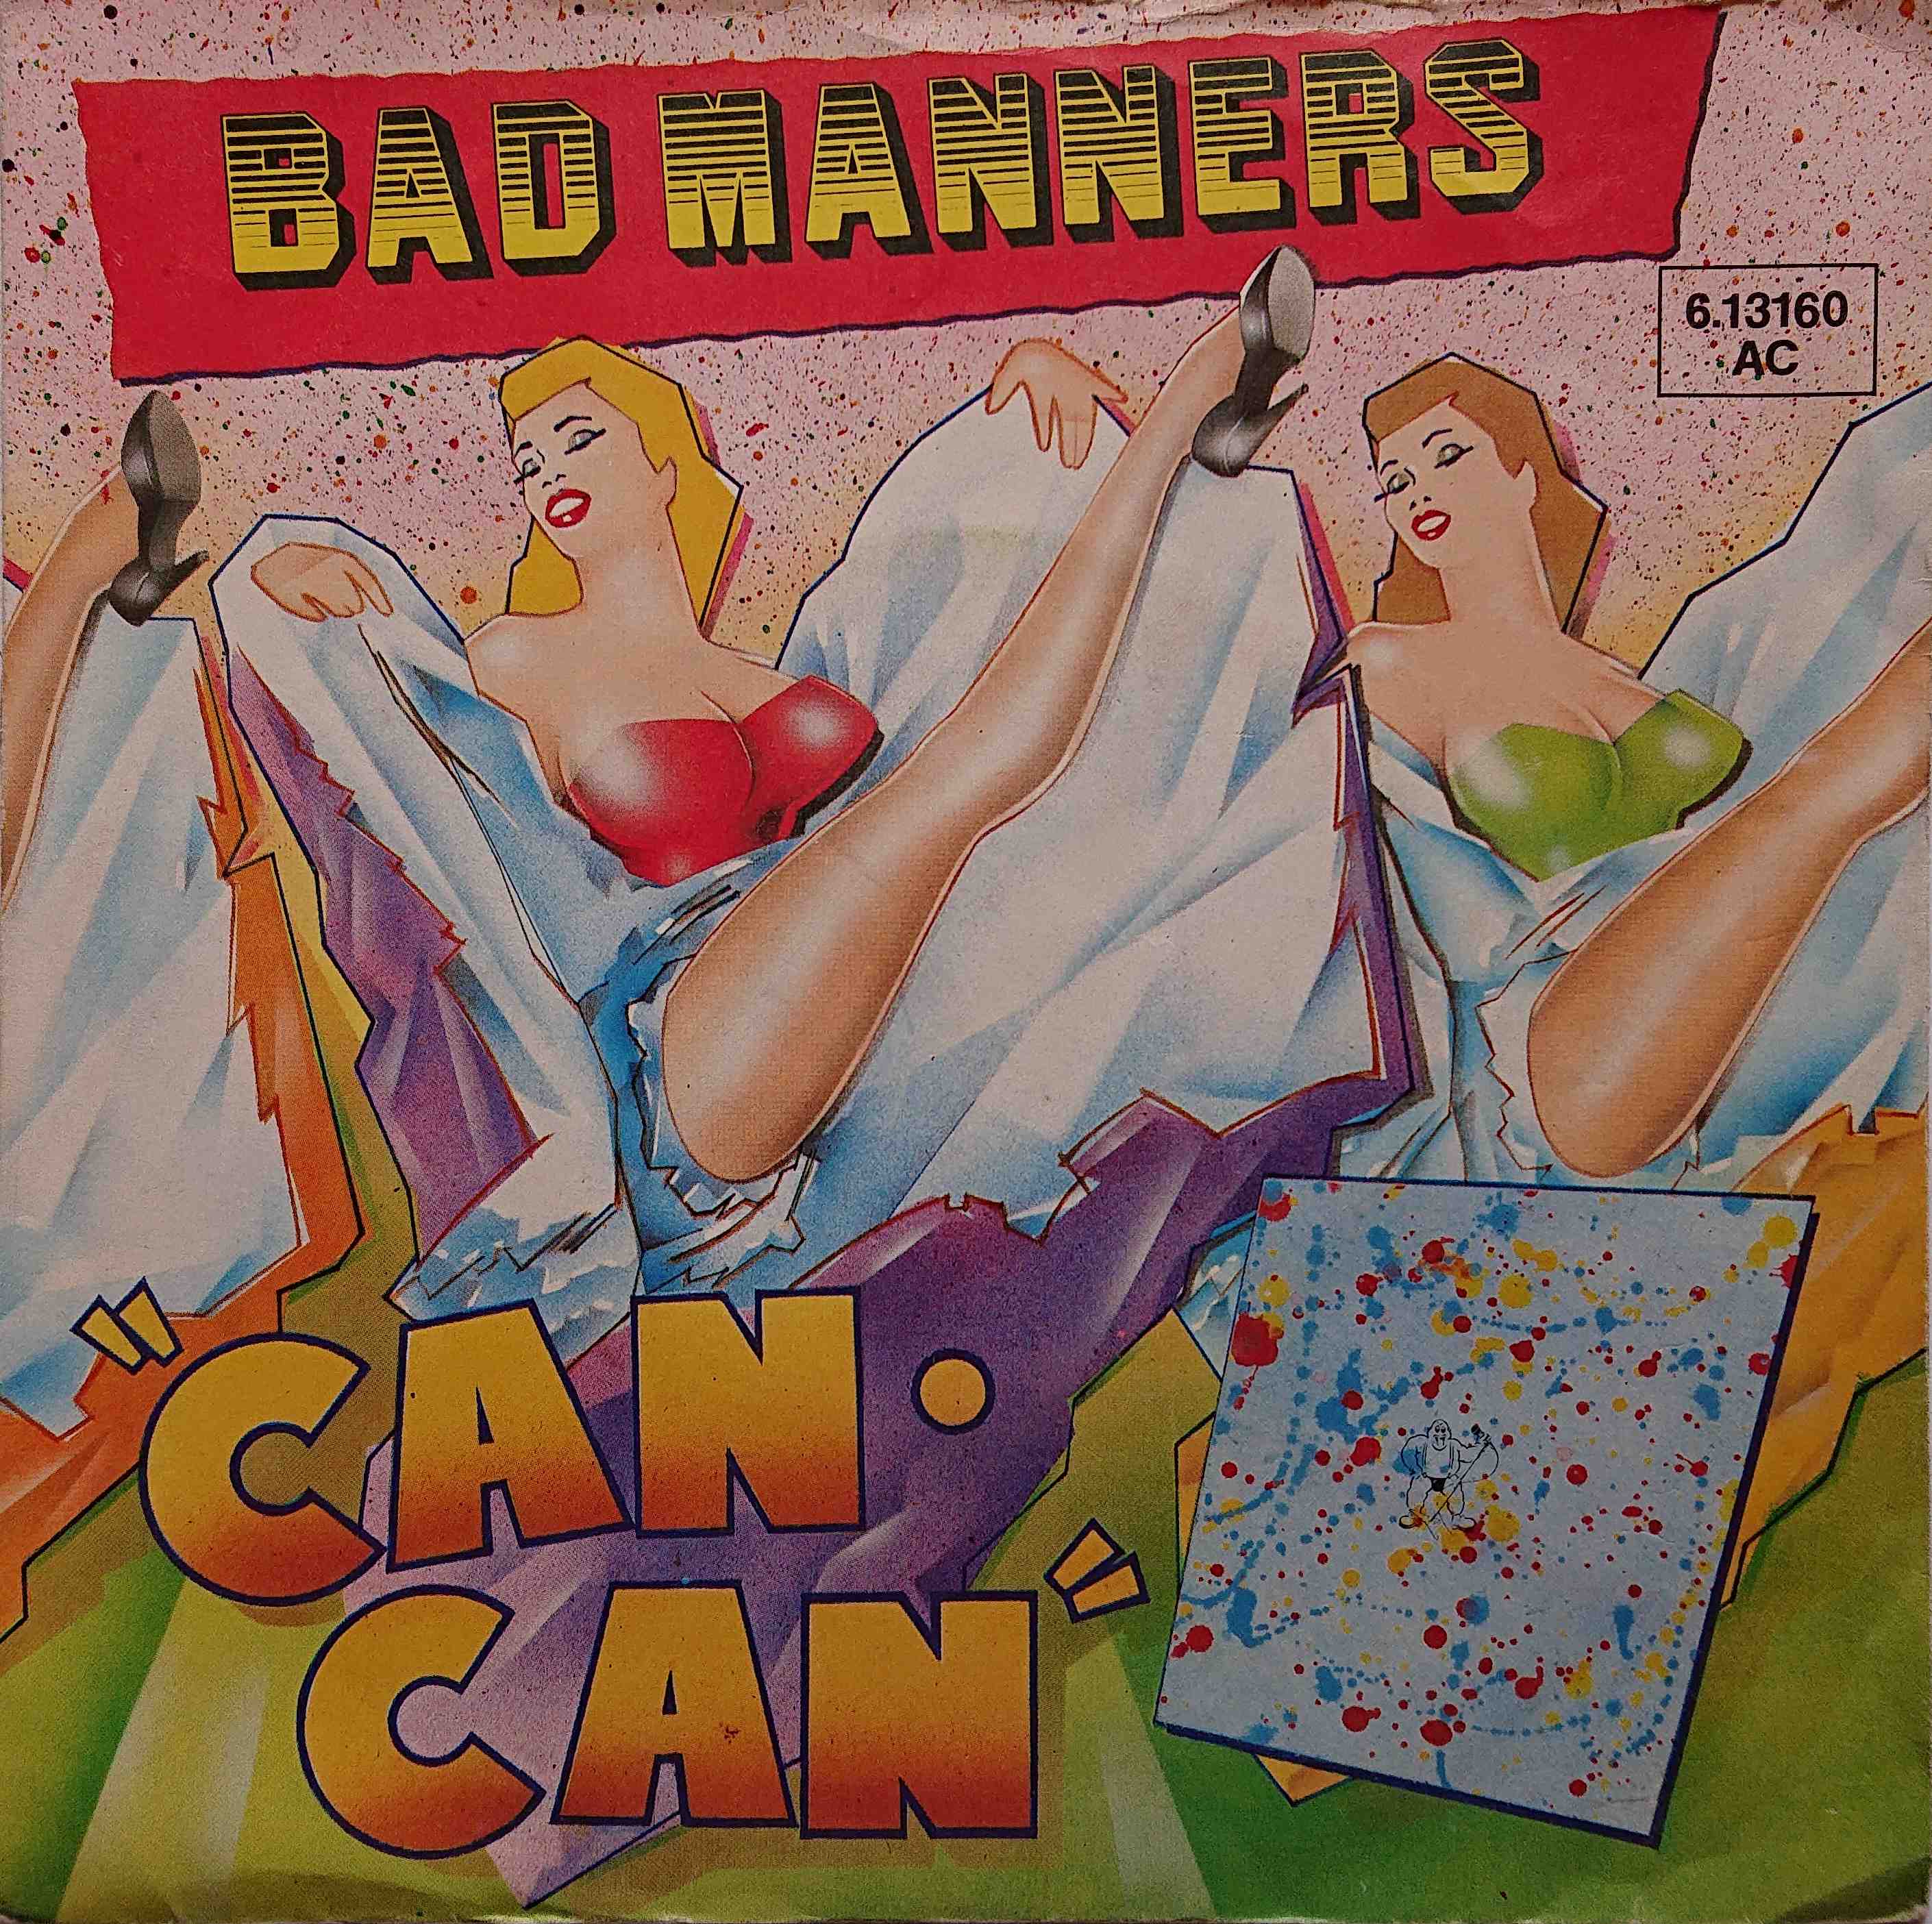 Picture of Can can by artist Bad Manners 